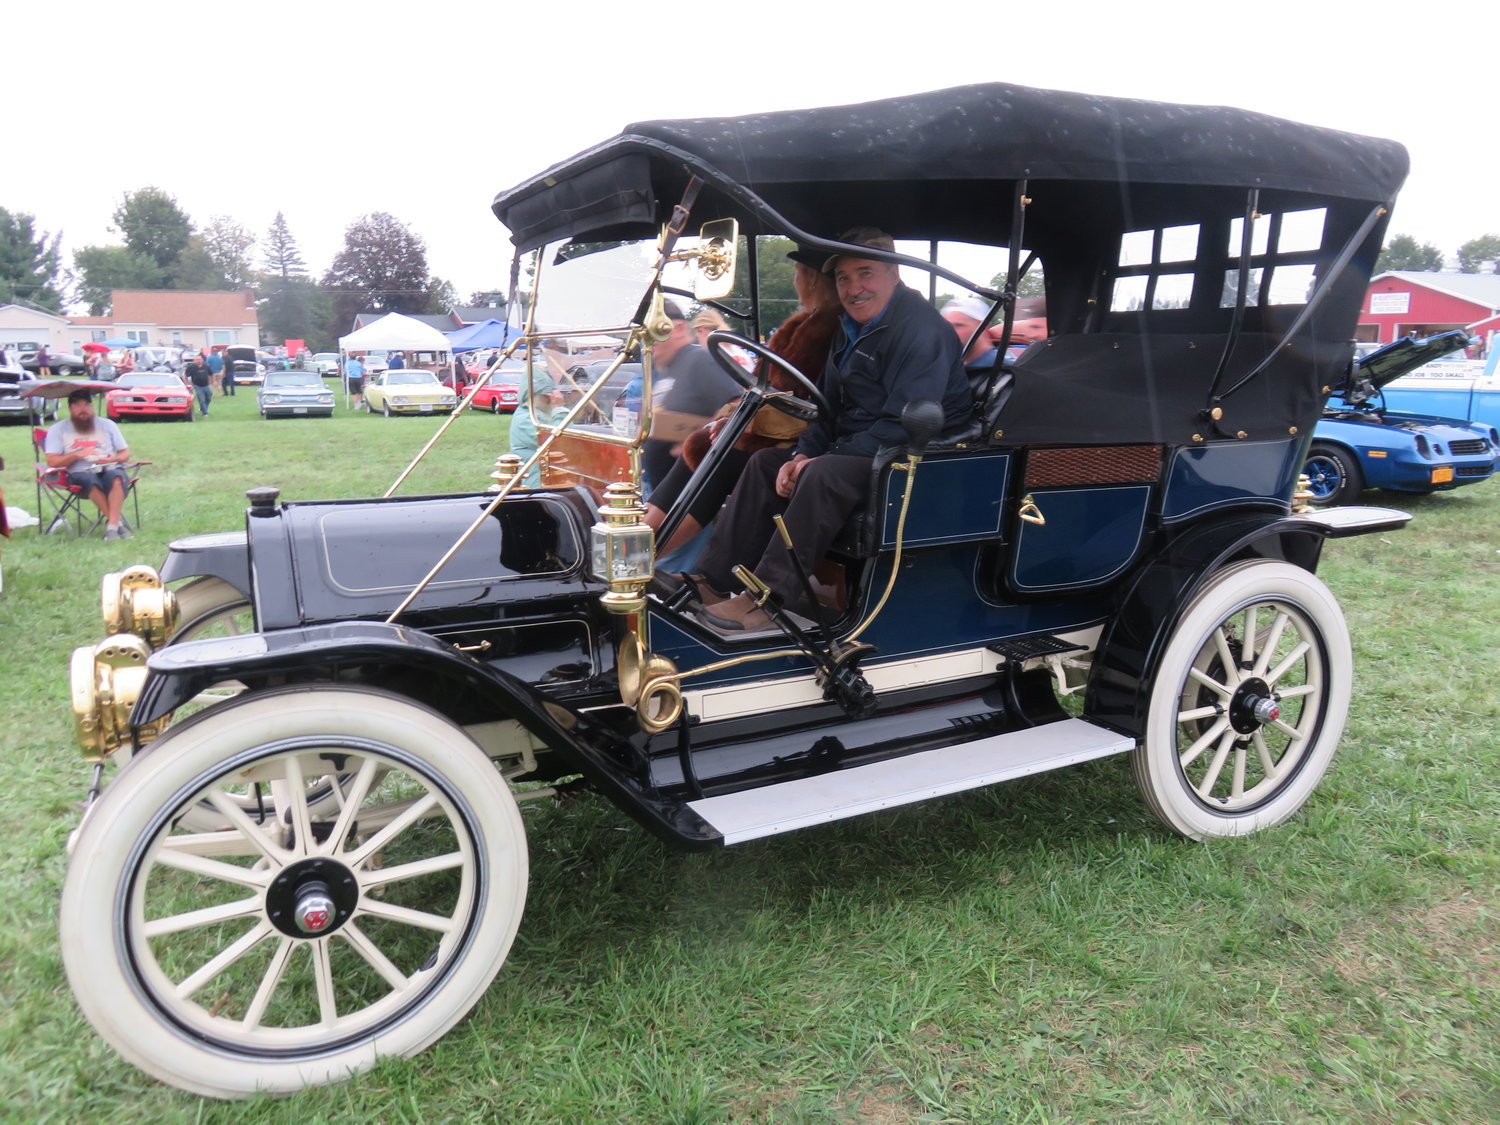 The Mohican Model A Ford Club will hold its 61st annual Antique Car Show and Flea Market at the Wampsville Firemen’s Field on Sunday, Sept. 11. Cars from the 1900s to 1989 will be on display.